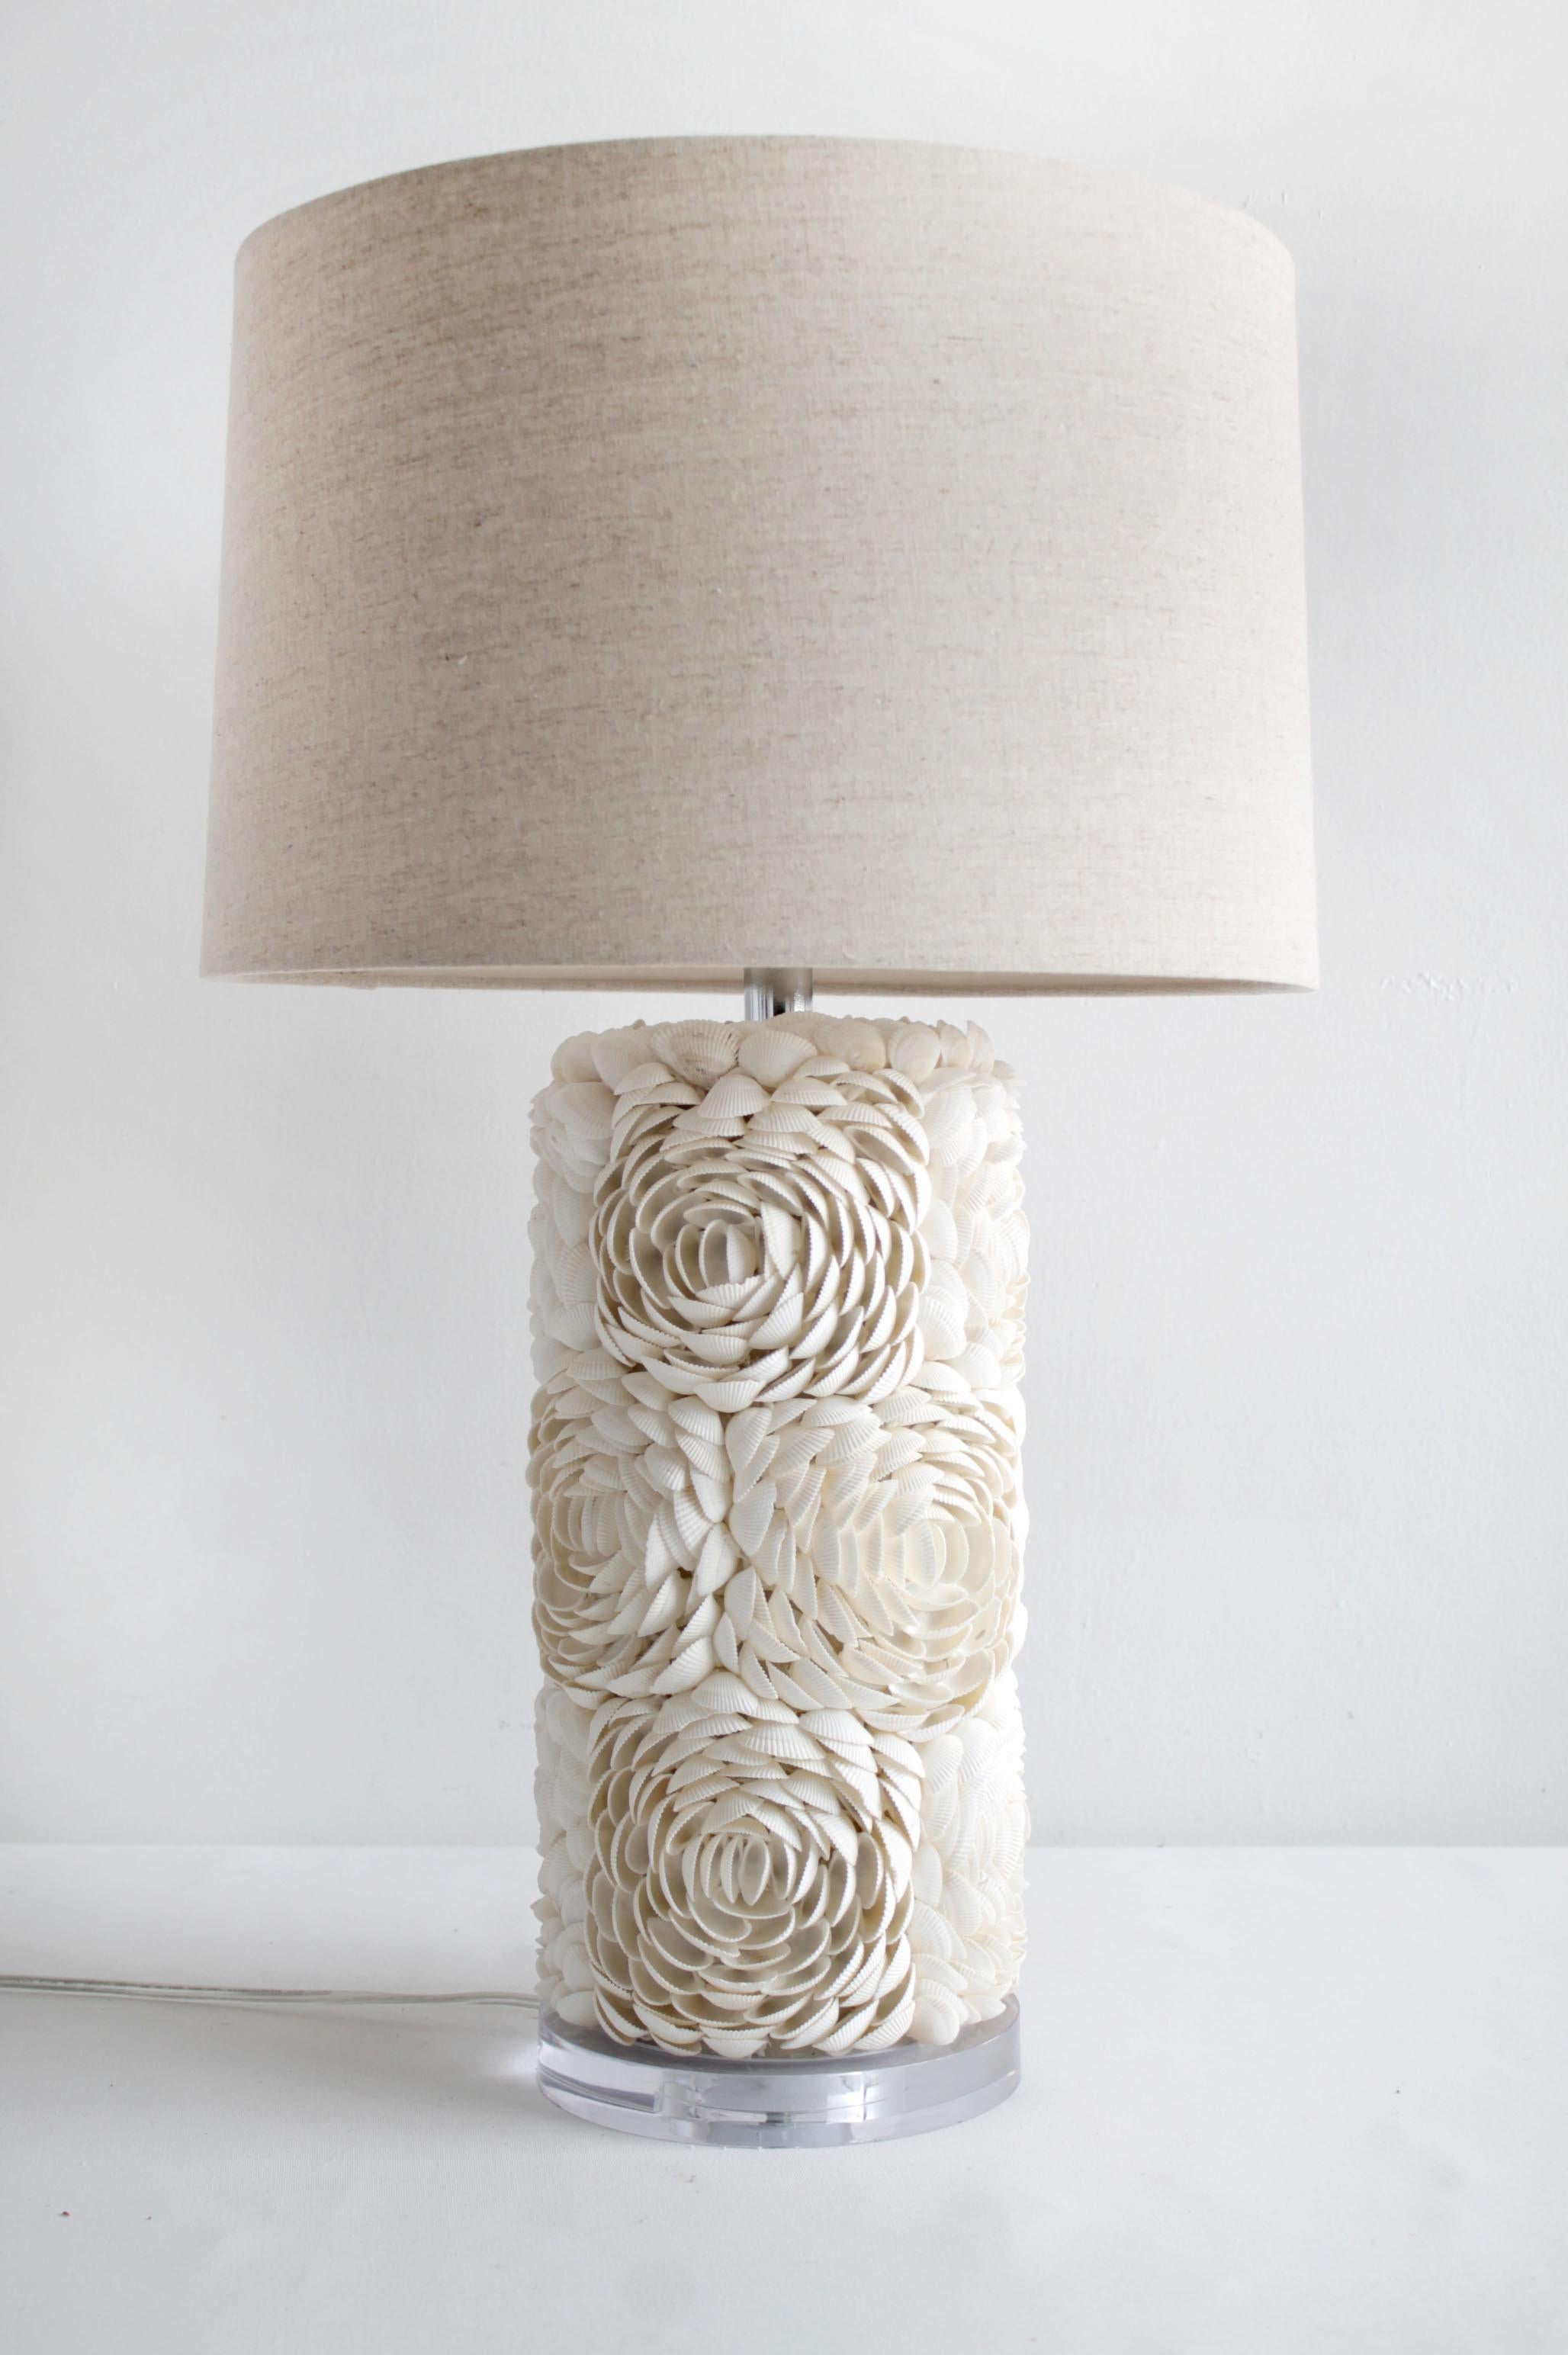 Pair of natural sea shell lamps with linen shades
White shells create a cup of rose clusters around the cylinder lamps. The base is a clear Lucite, with 3 way switch, standard US Plug, and natural linen shades.
Measures: 7